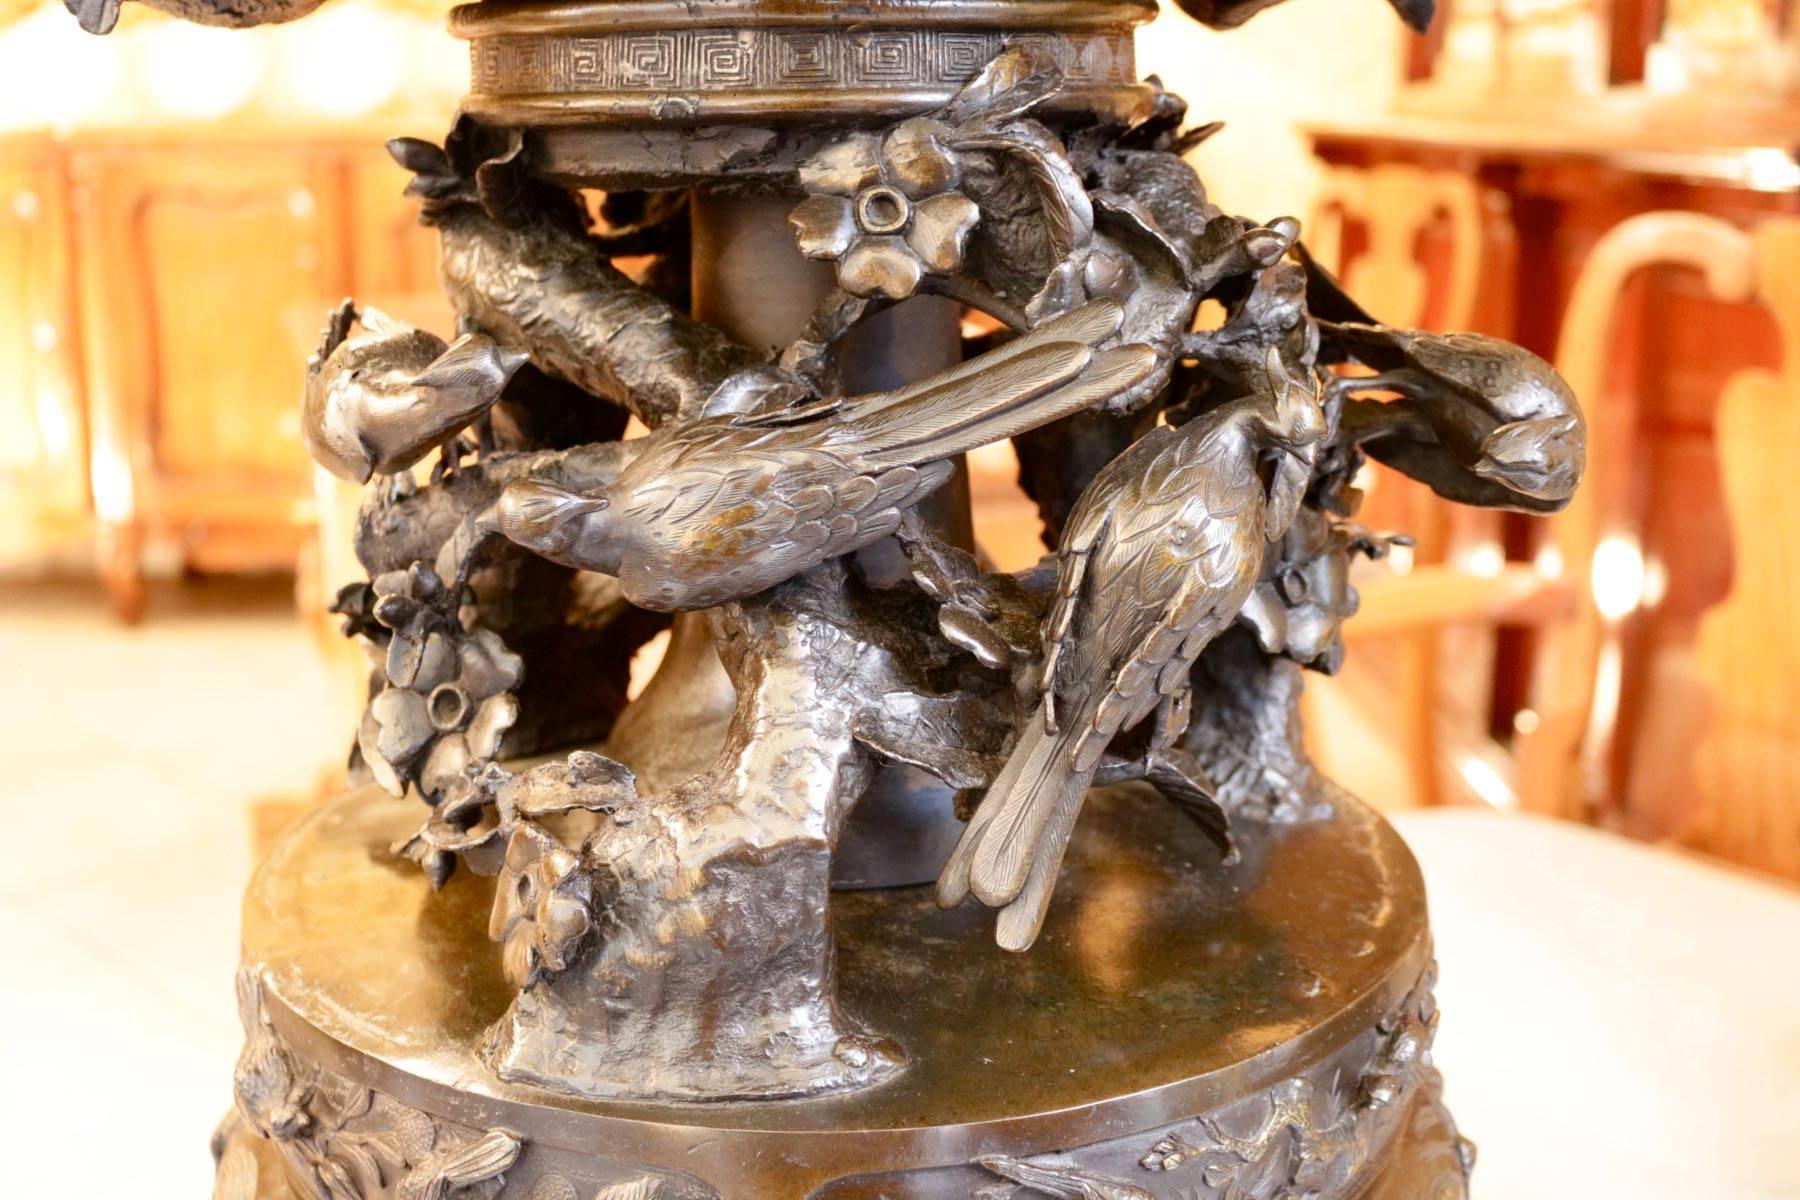 19th century Japanese incense burner with 15 bronze birds in haut relief on branches and foliage in the middle of a natural scene, ducks and birds are on the bas relief, two cranes on the lid.
The wooden base consists of three elephants head with